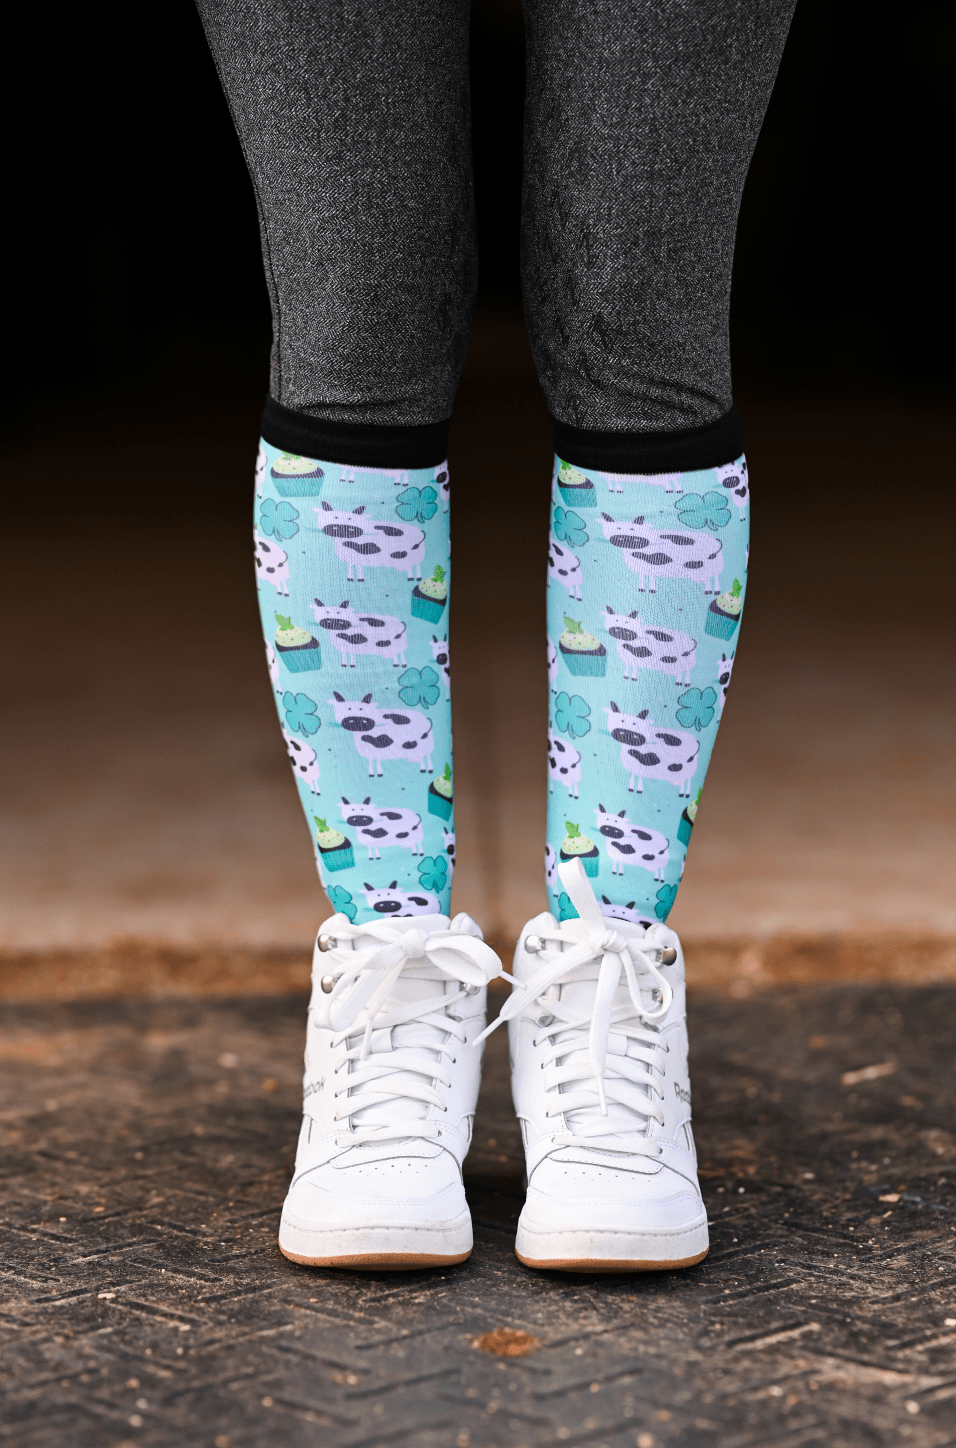 dreamers & schemers Pair & A Spare Things That Start with C Youth Pair & a Spare equestrian boot socks boot socks thin socks riding socks pattern socks tall socks funny socks knee high socks horse socks horse show socks